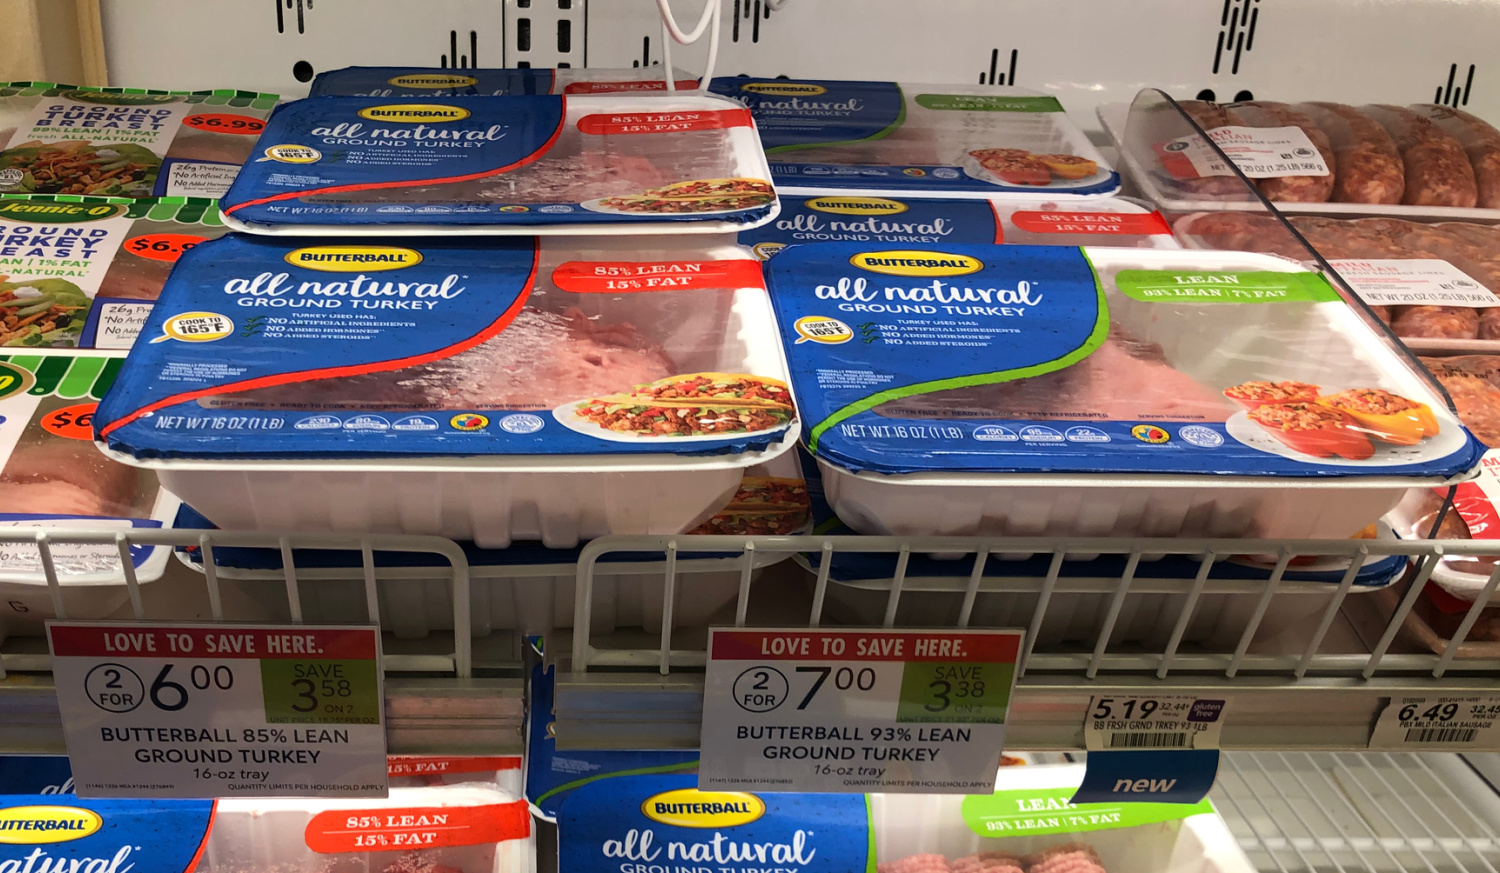 Butterball Ground Turkey As Low As $2.50 At Publix on I Heart Publix